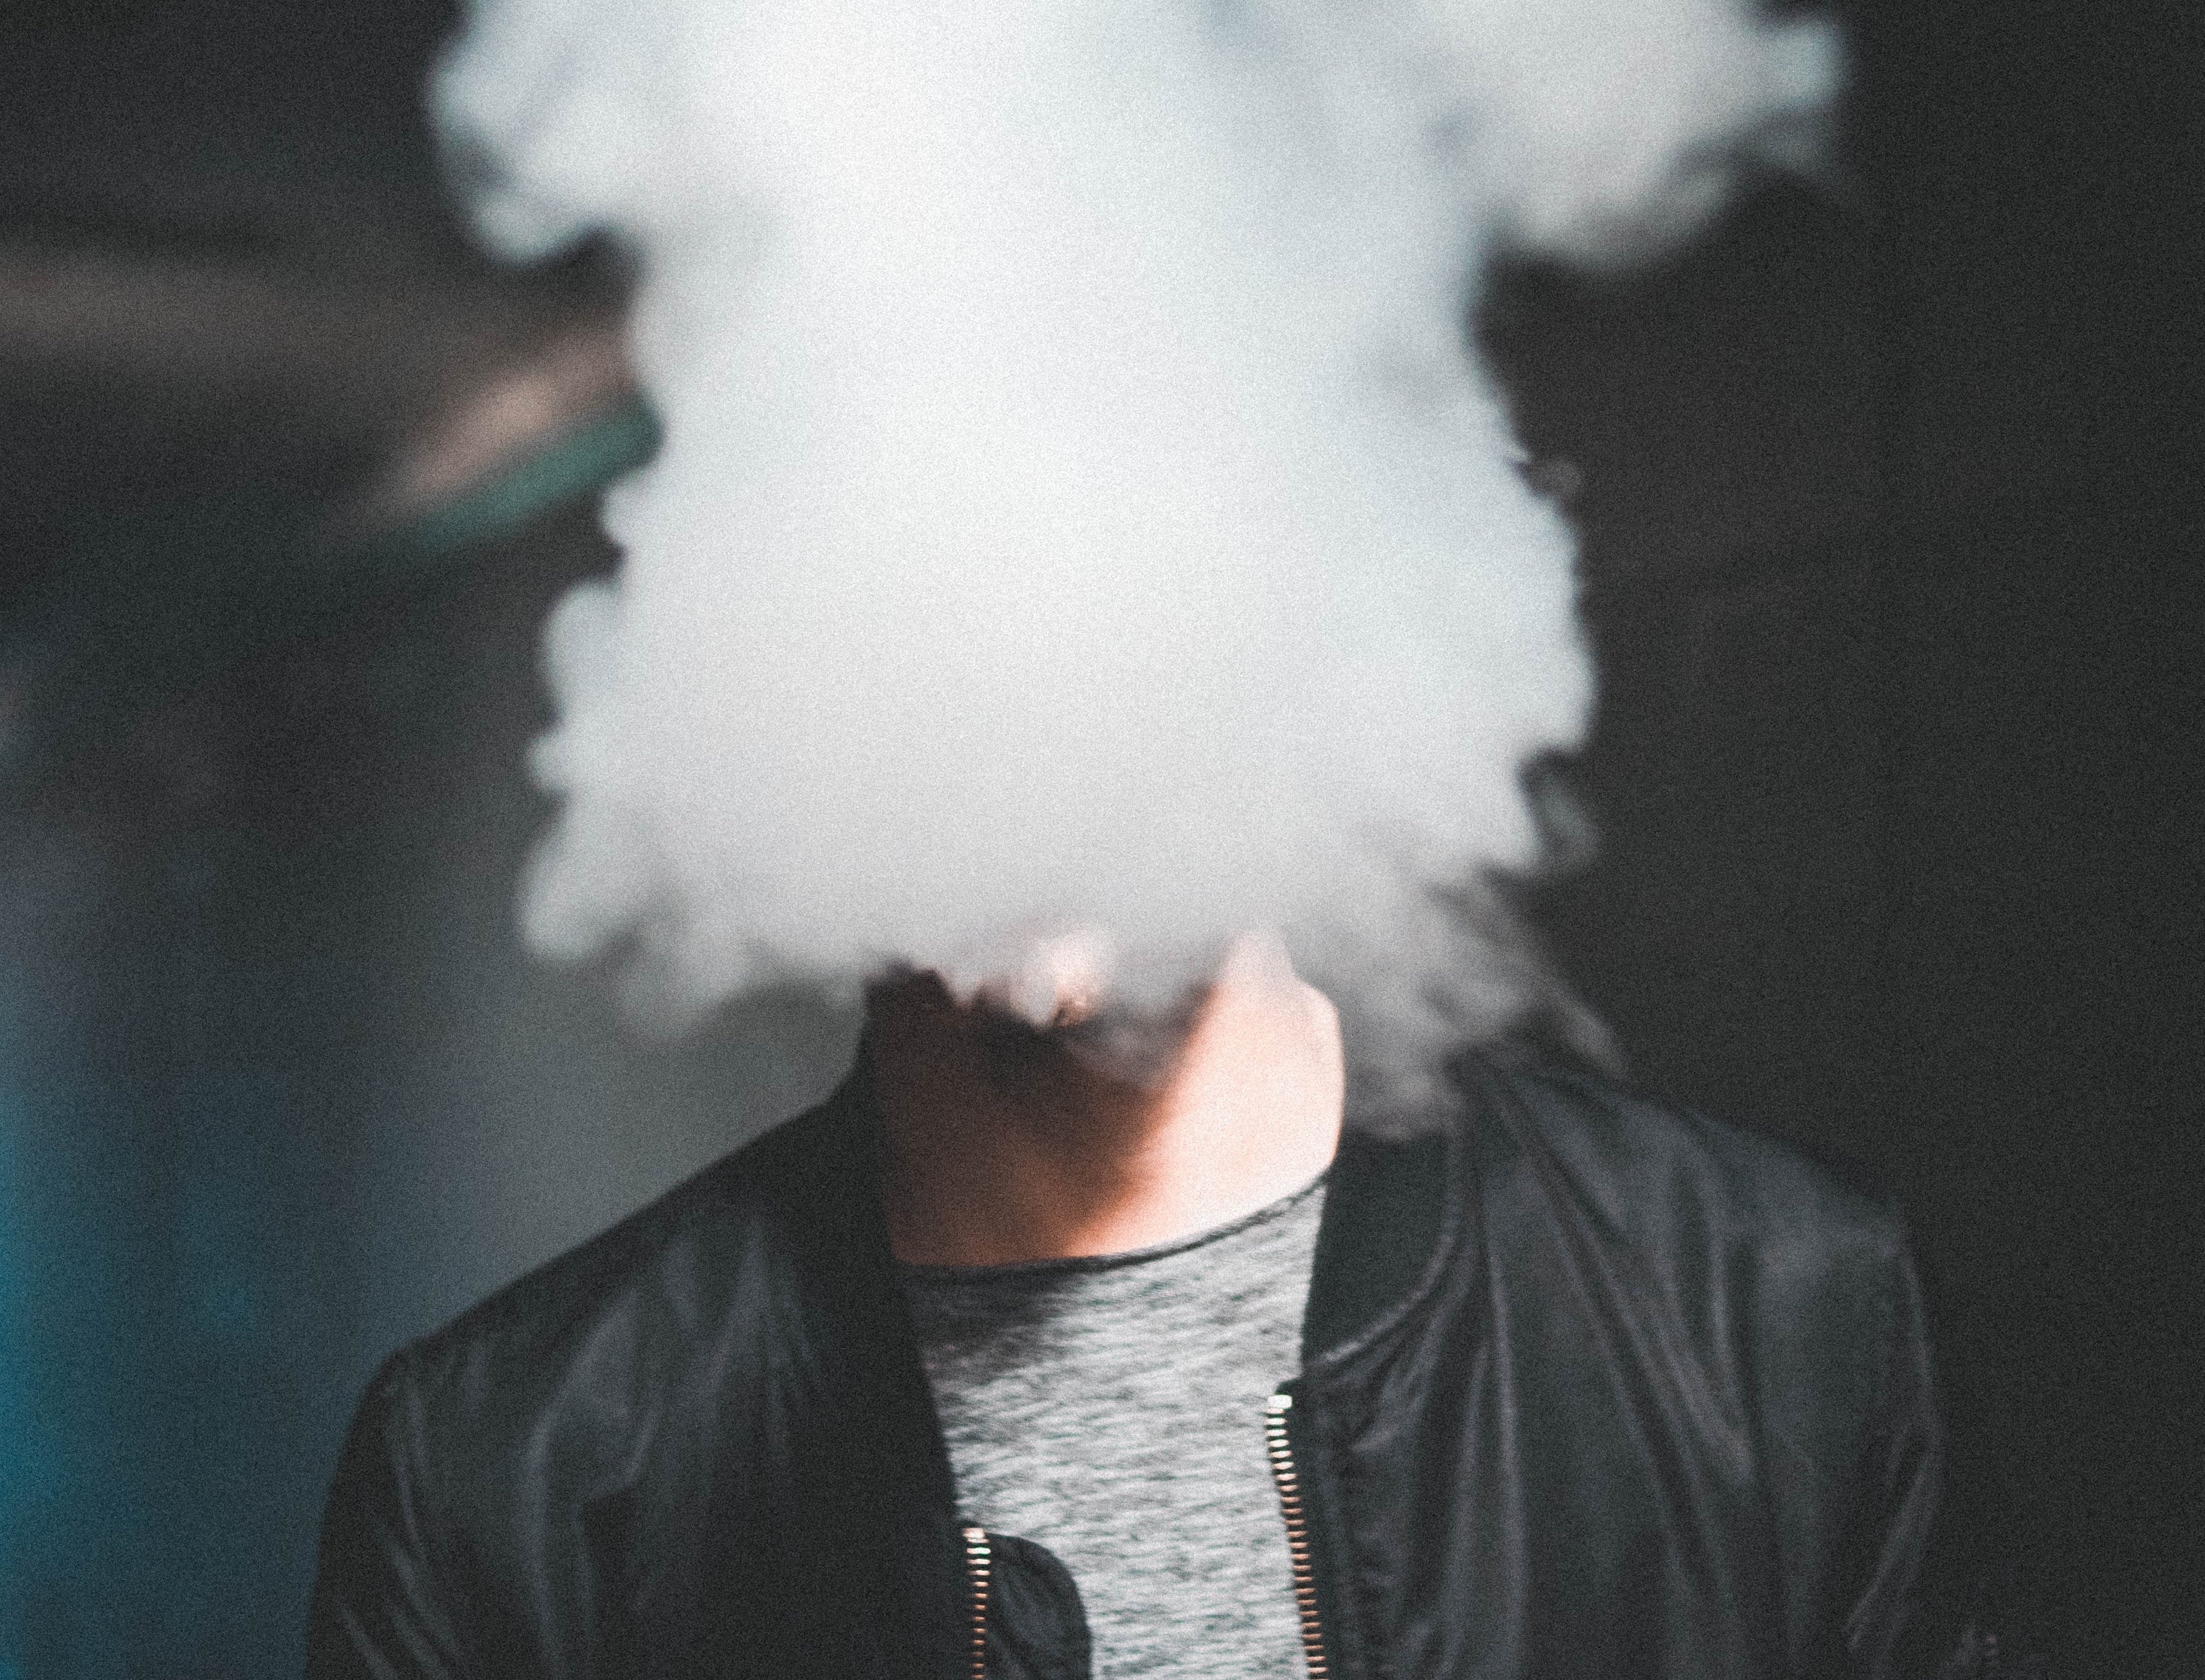 Man whose face is obscured by smoke